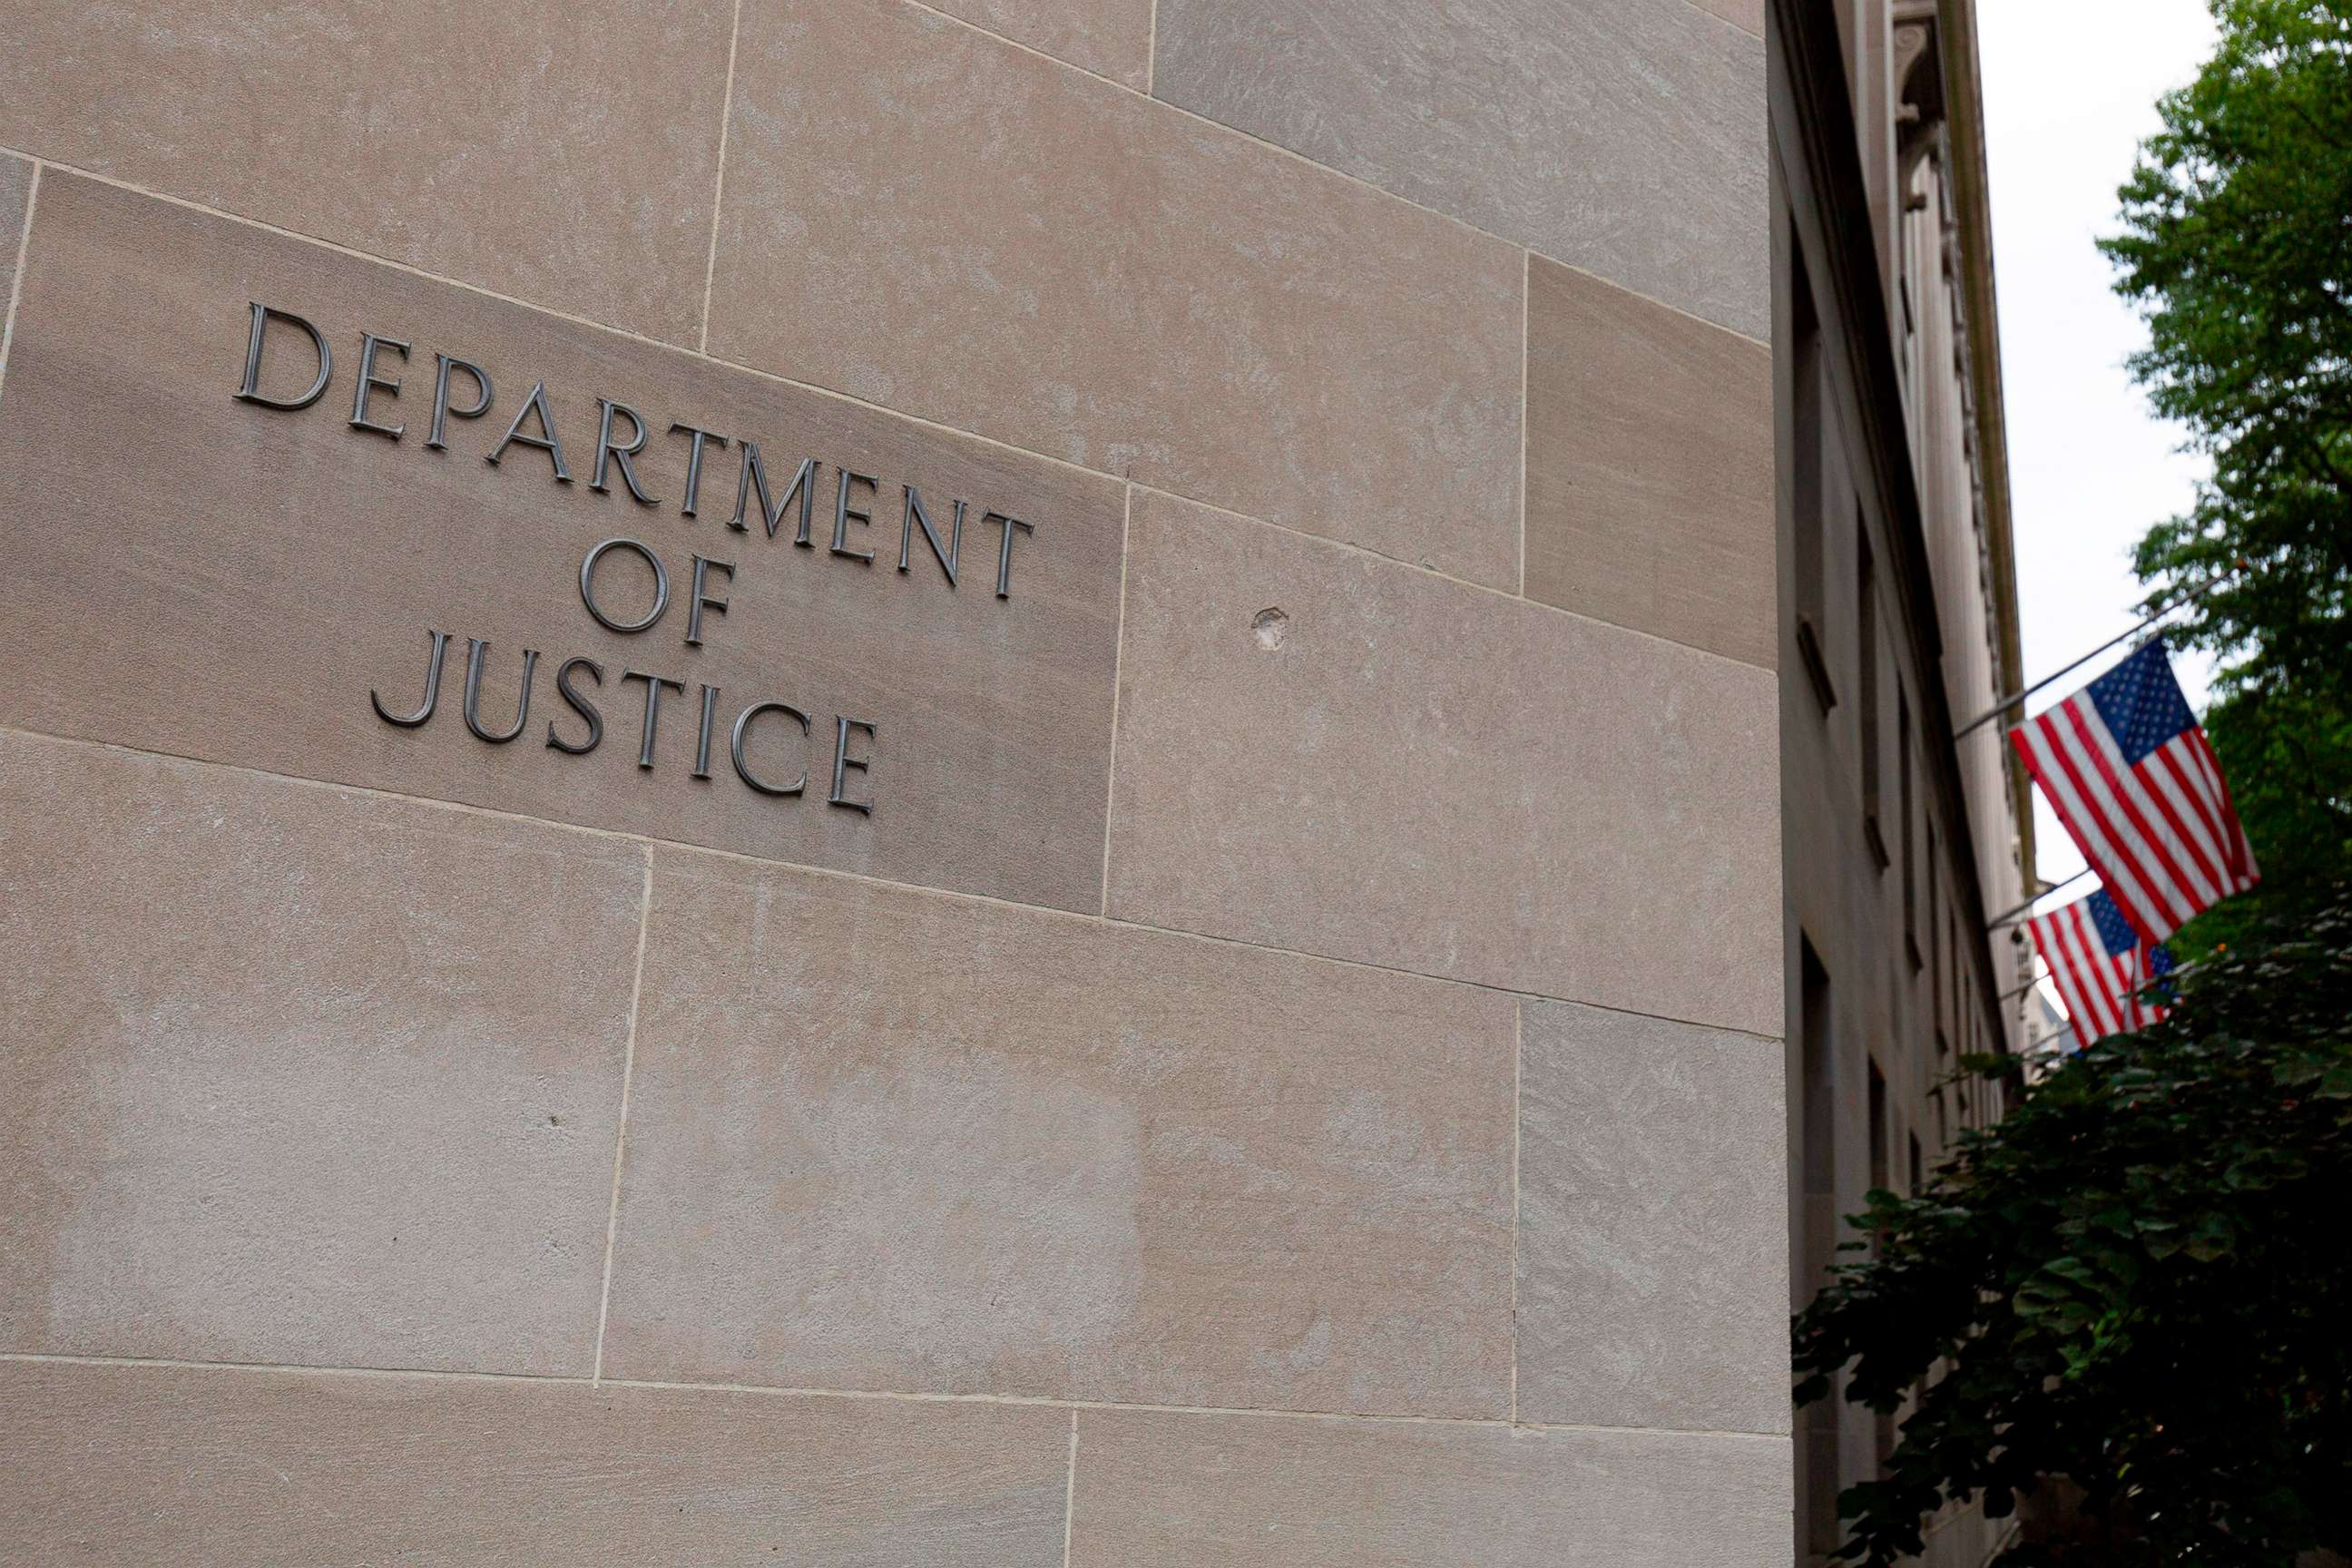 PHOTO: In this July 22, 2019, file photo, the US Department of Justice building is shown.